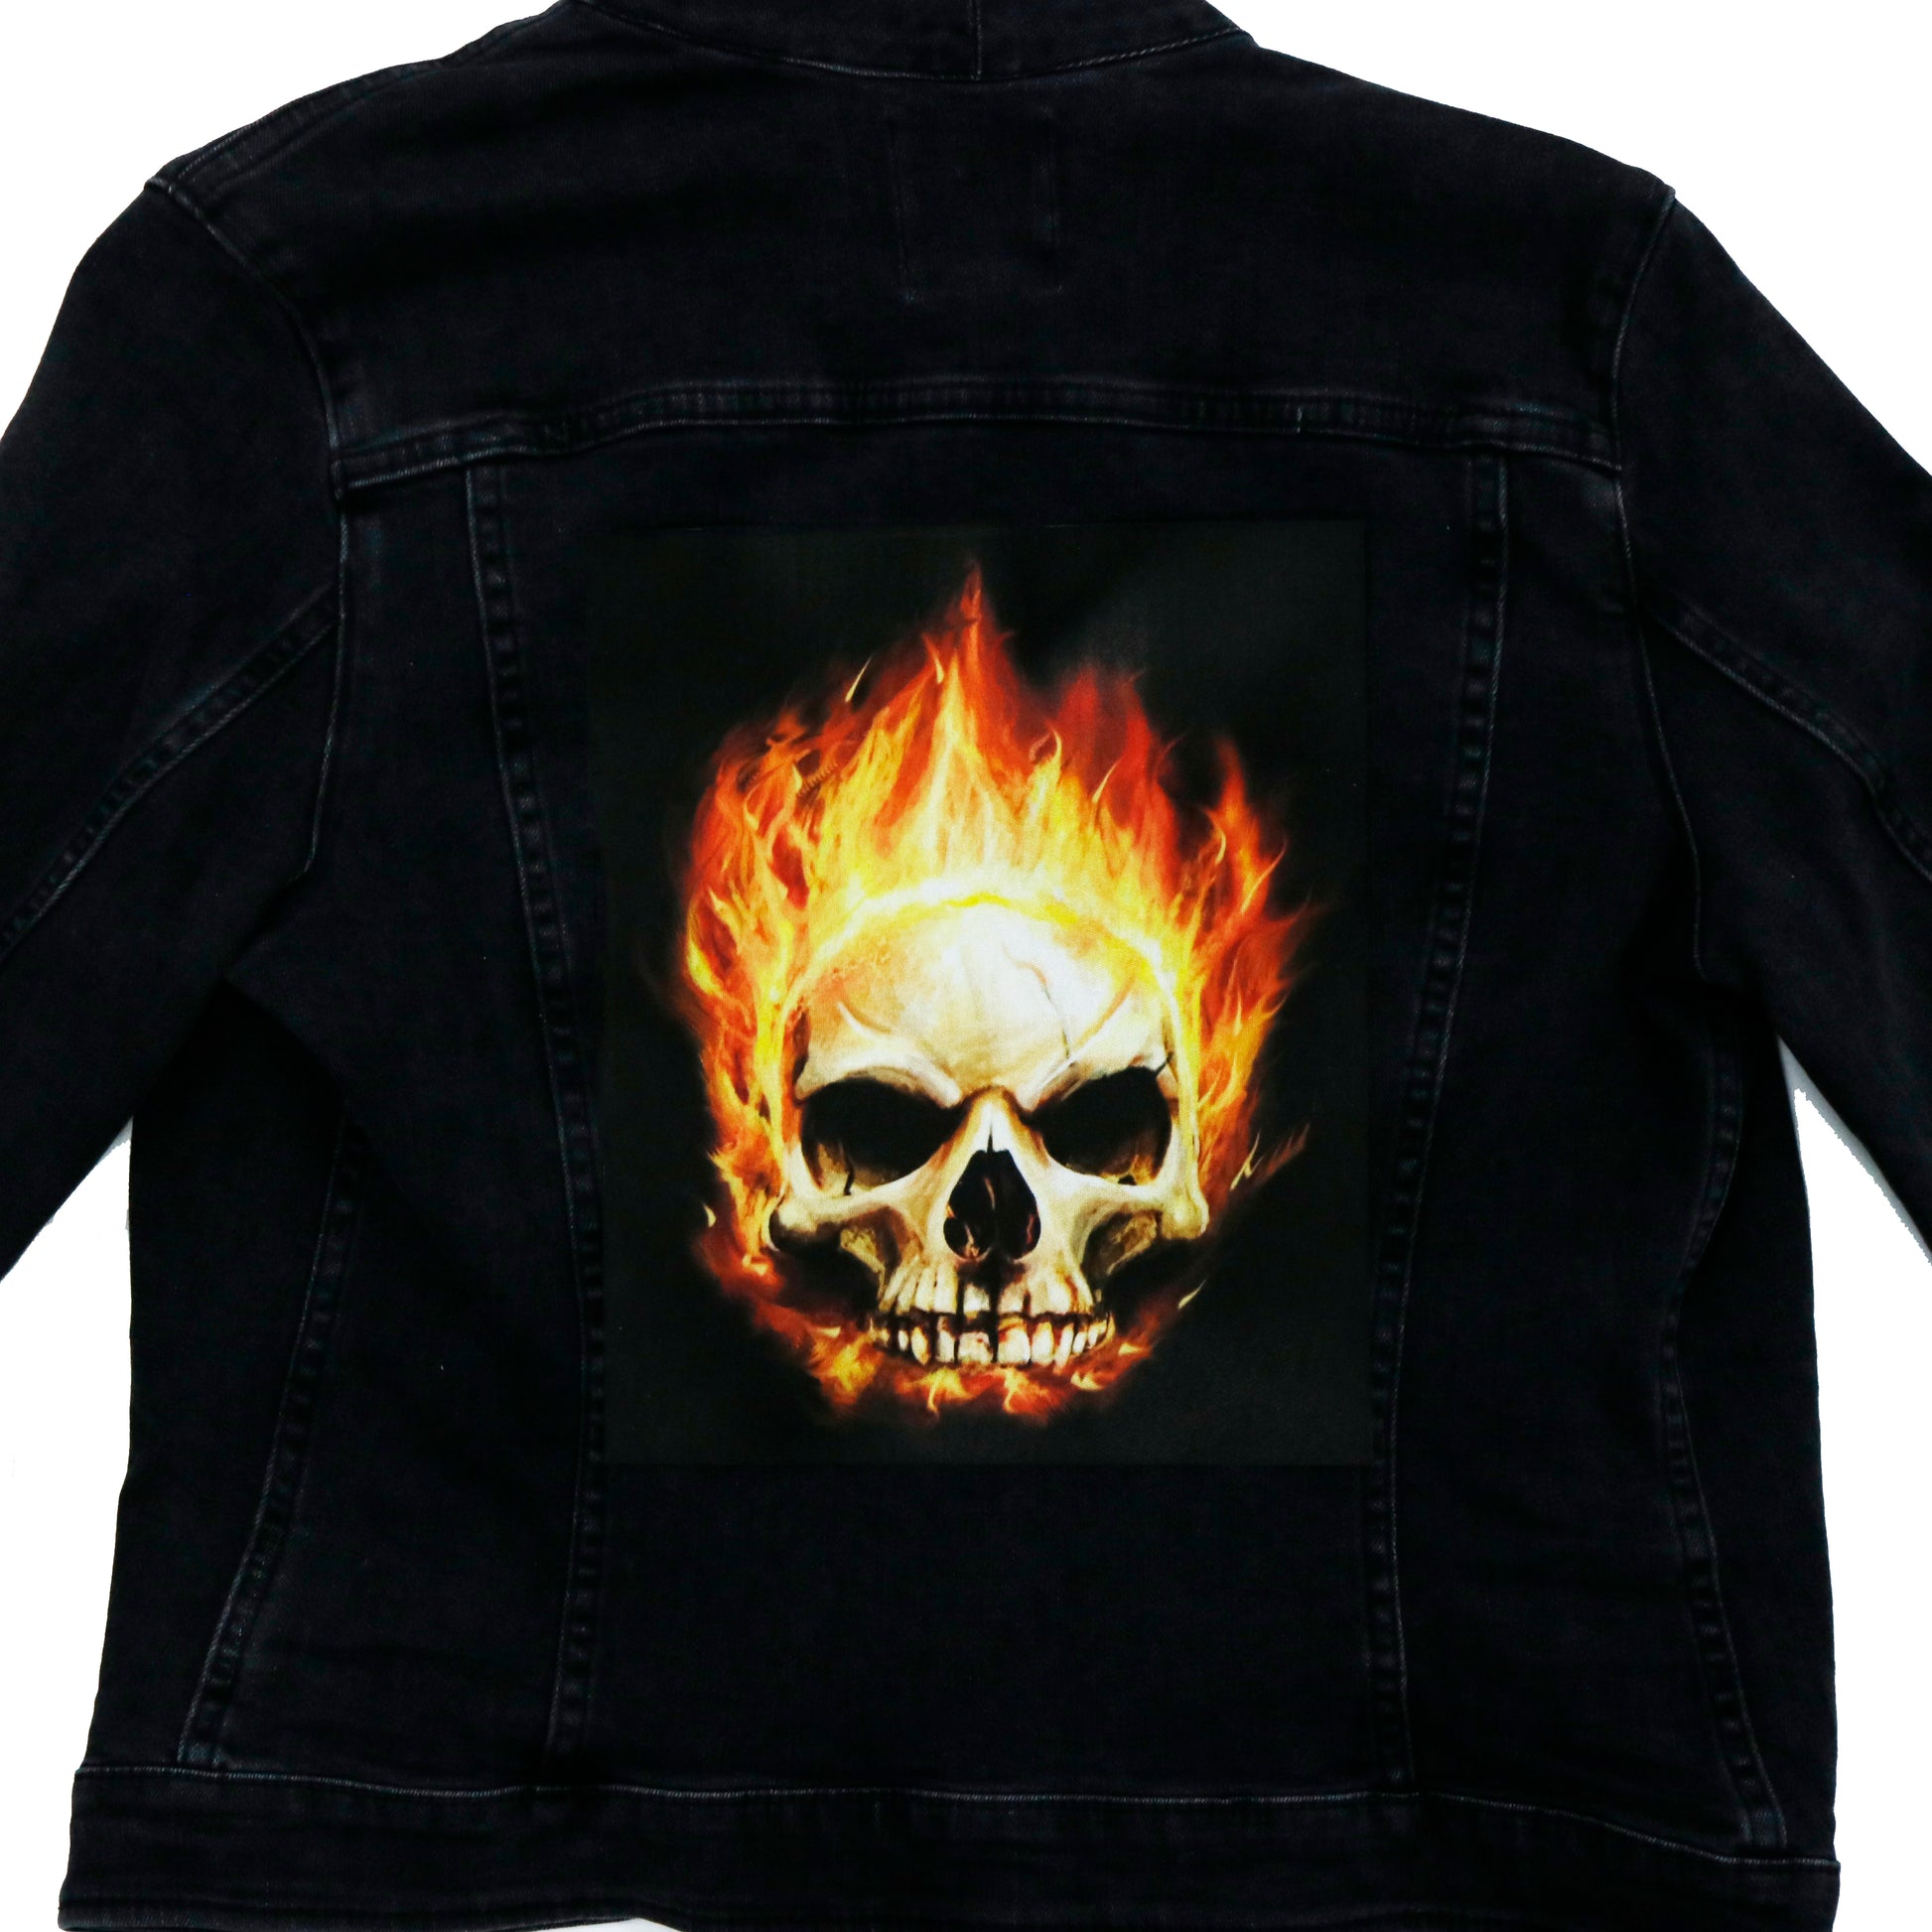 Skull On Fire Iron-On FotoPatch 